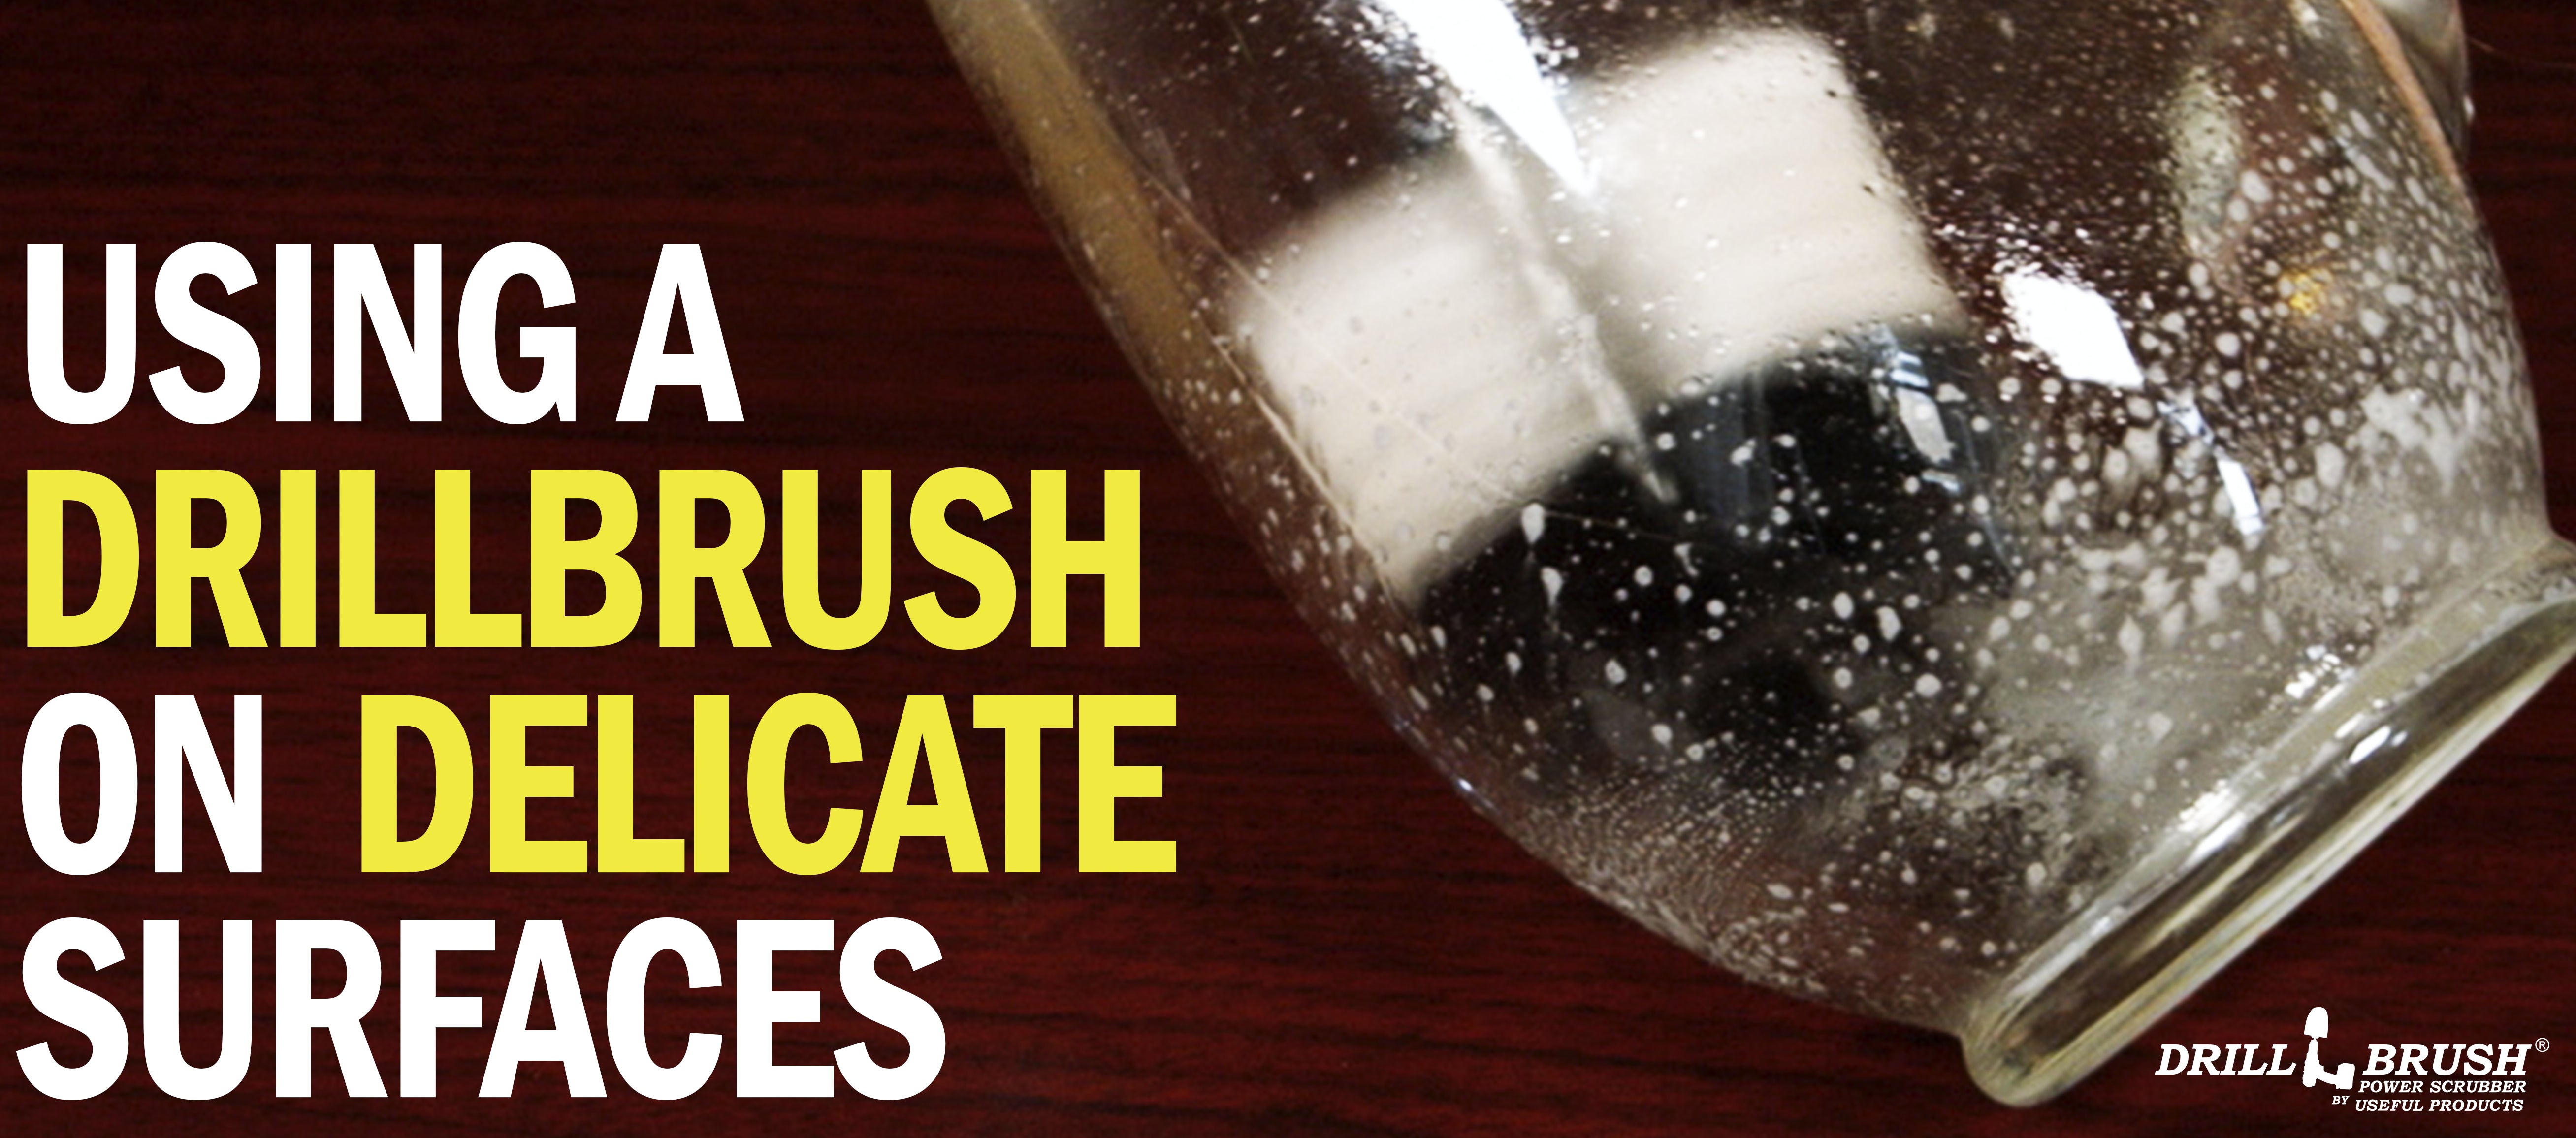 Tips for Scrubbing Delicate Surfaces with a Drillbrush